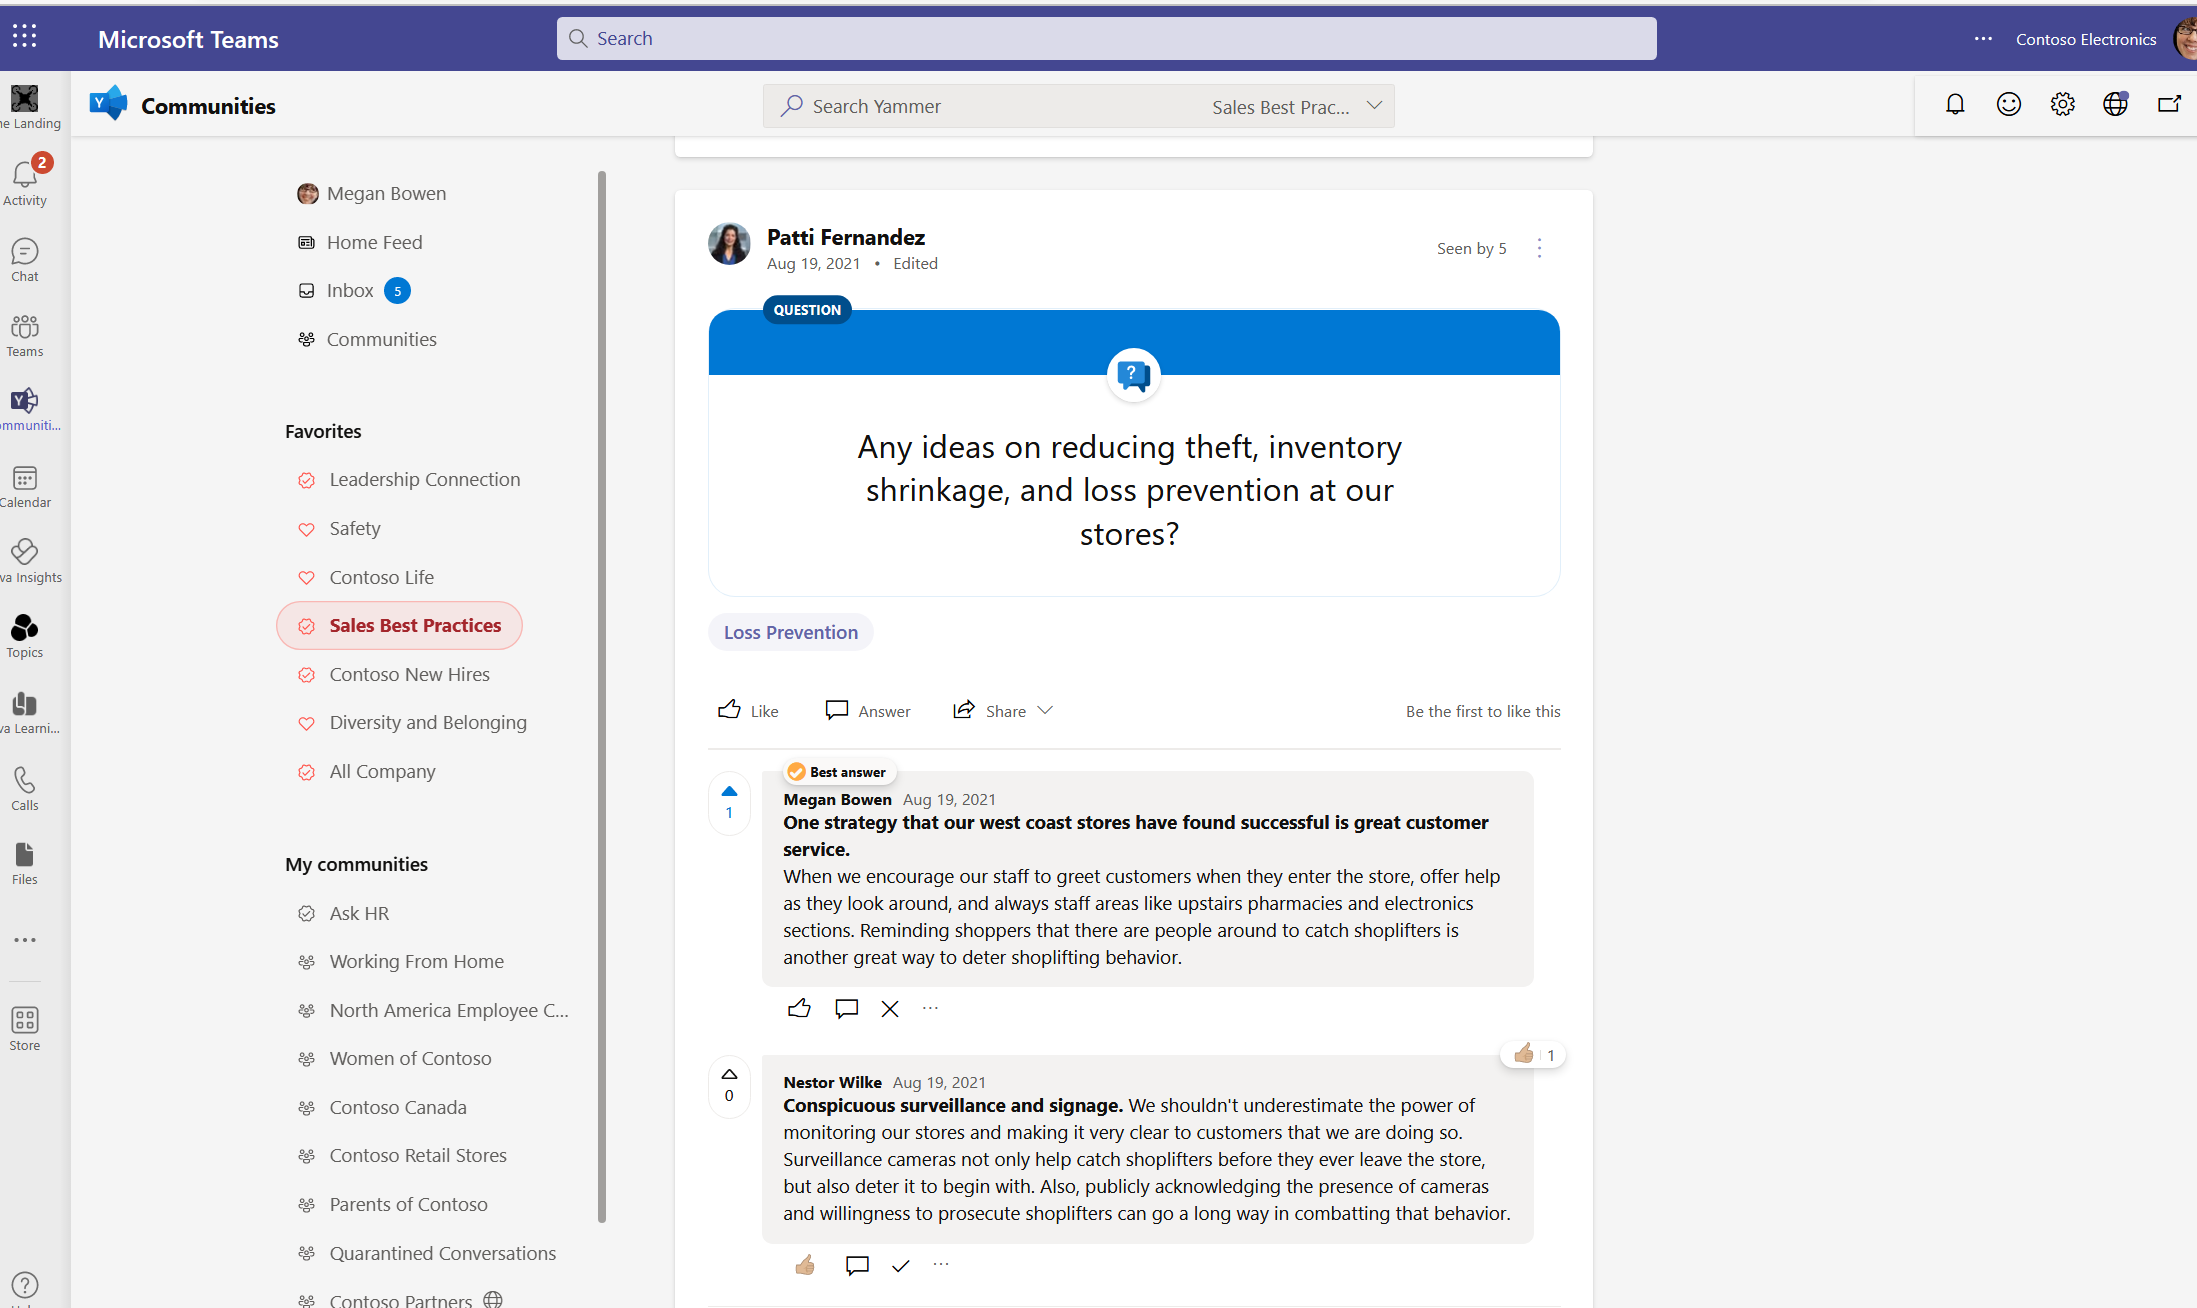 Upvoting results will not appear in Yammer's live event feed or Teams Q&A.